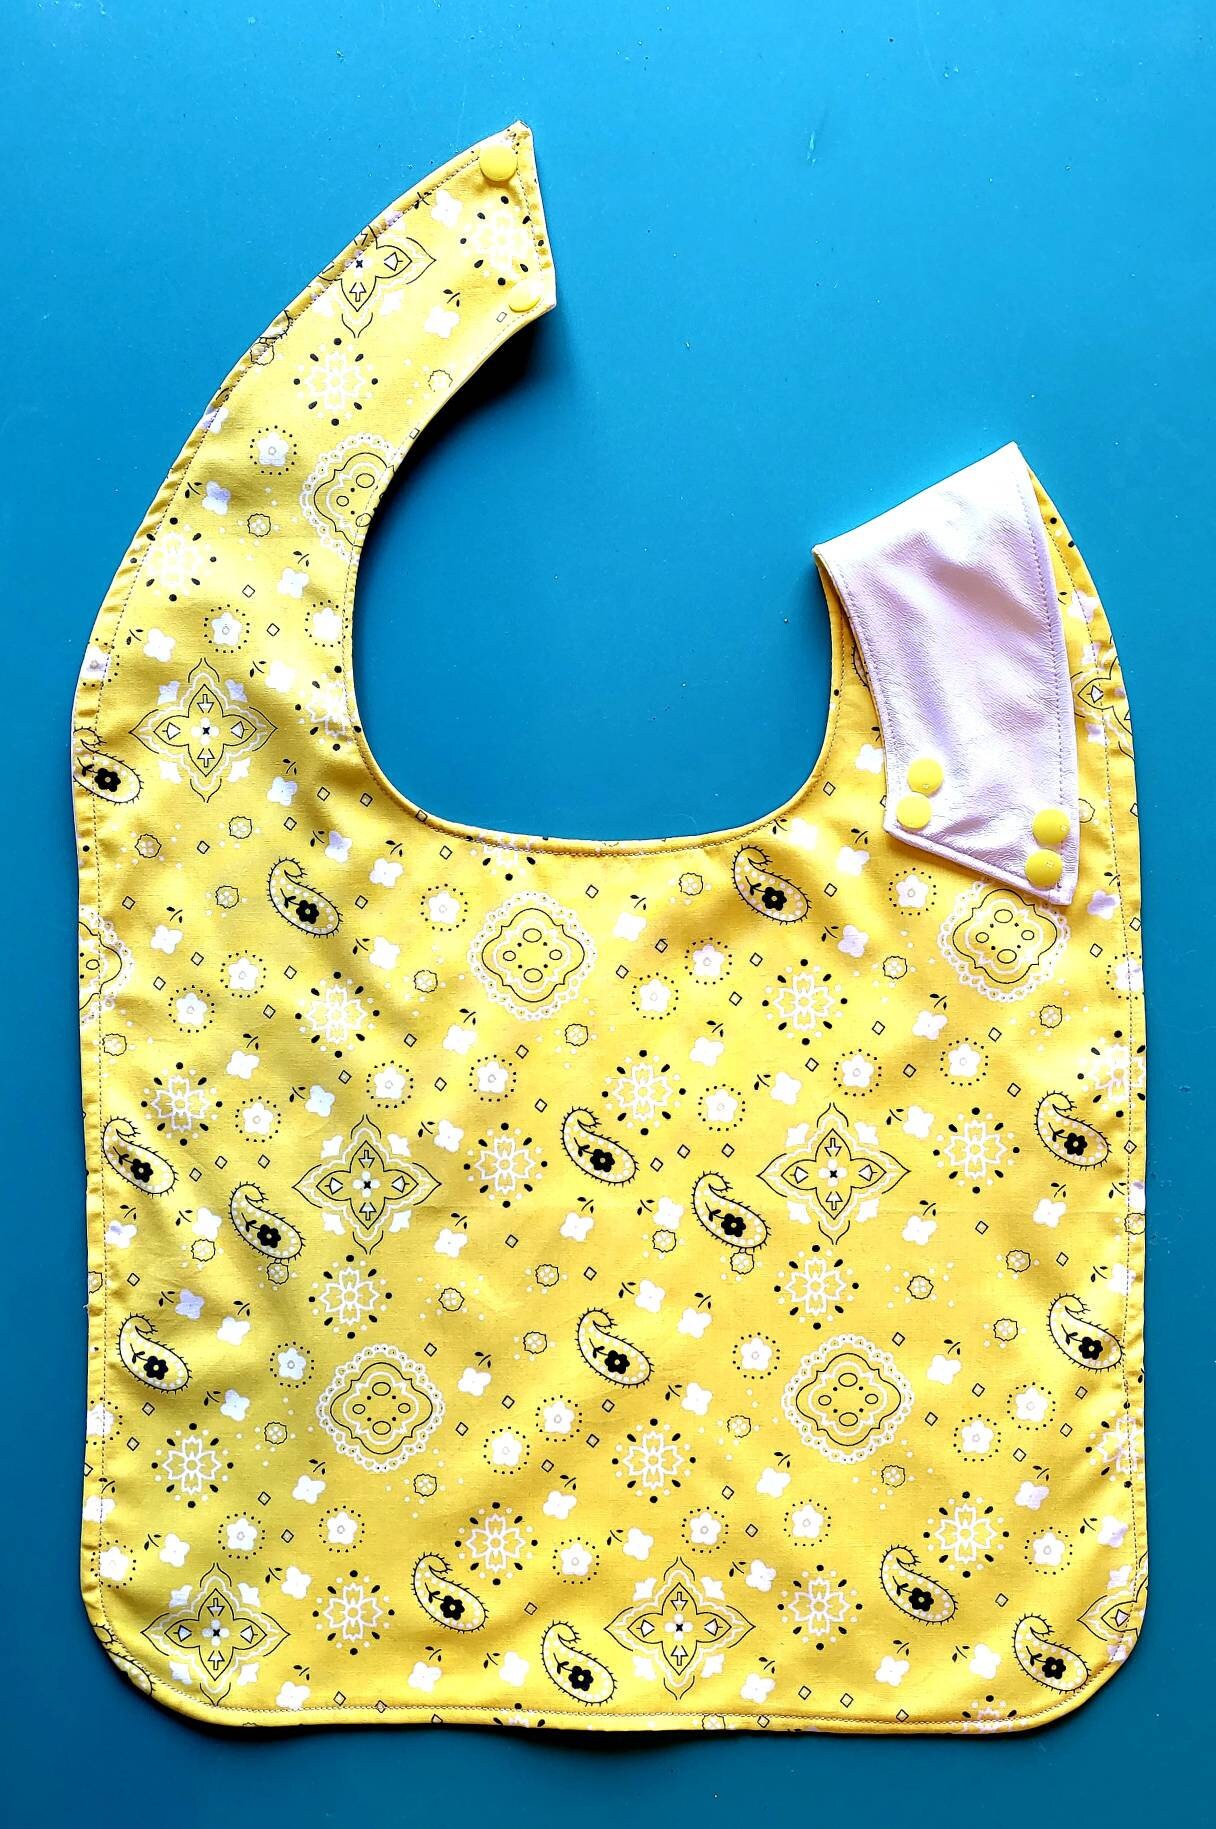 Bib is soft Top buy. Bib/clothing protector is made of cotton fabric lightweight and comfortable to wear More styles High quality Accessoires Sjaals & omslagdoeken Kragen & slabben 